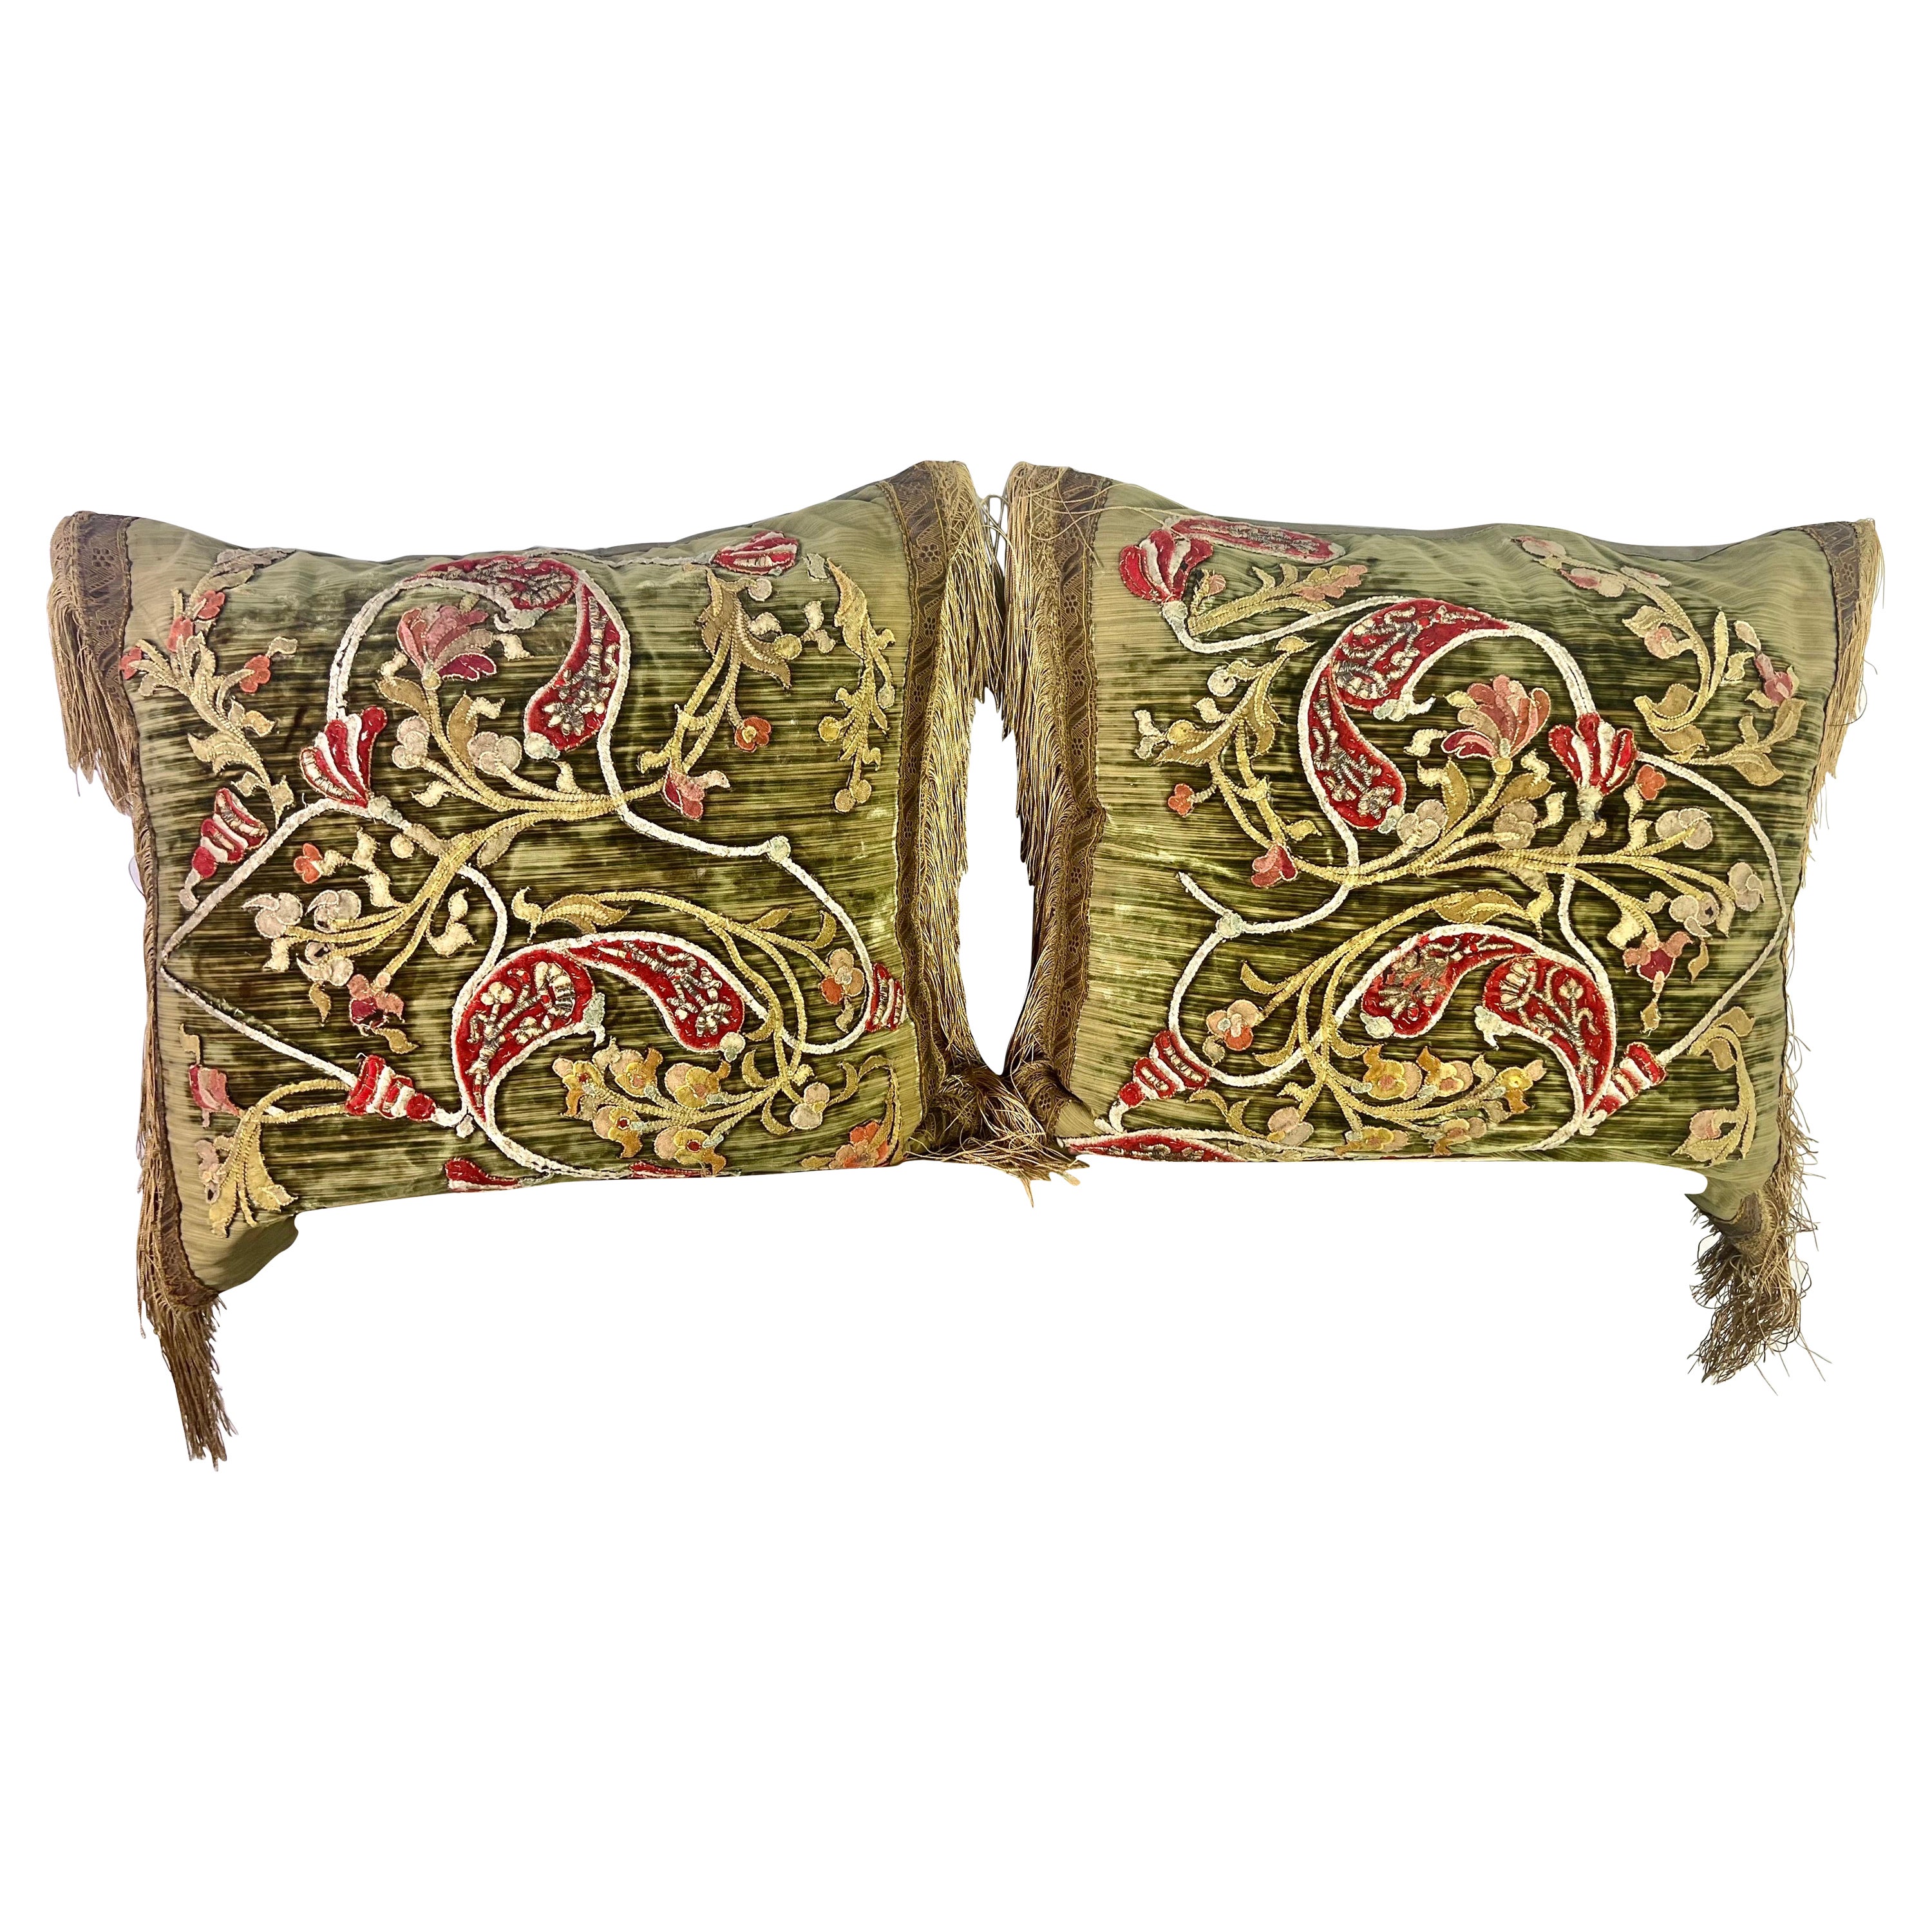 Pair of Custom Pillows w/ 18th C. Textile Fronts For Sale